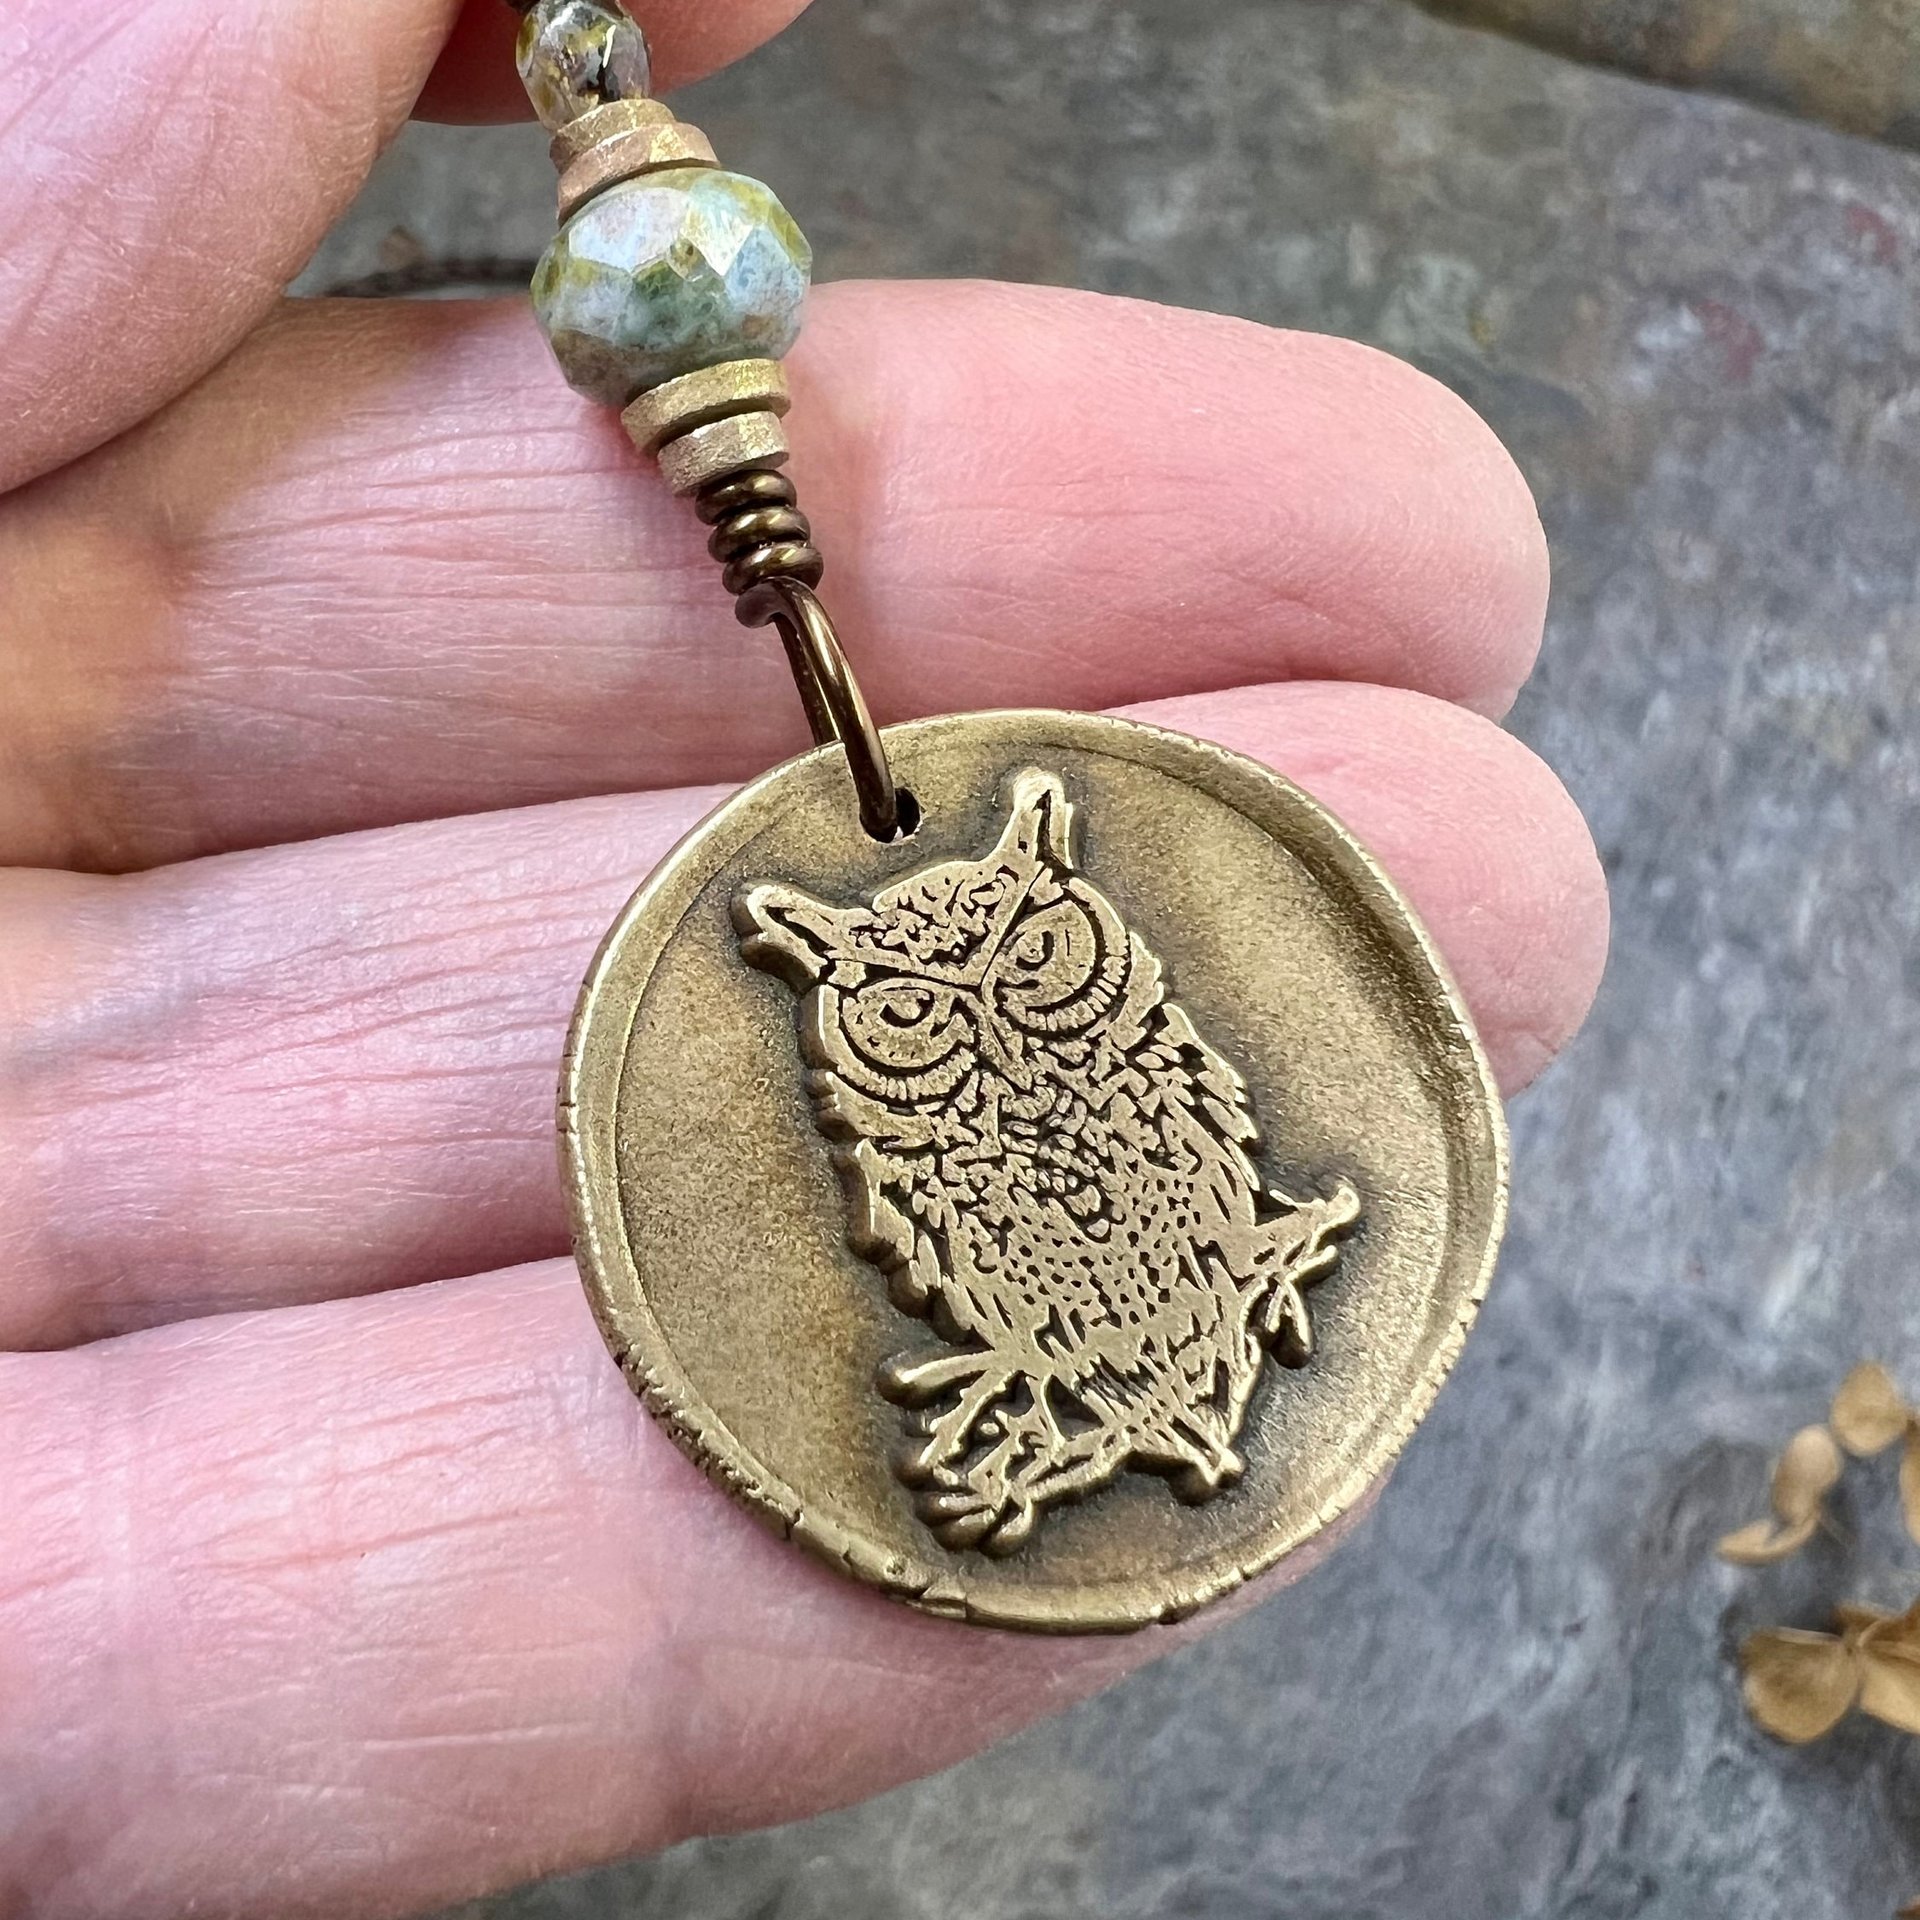 Owl Bronze Pendant, Wax Seal Charm, Czech Glass Bead, Magical Wise, Tree Branches, Pagan Samhain, Celtic Witch Jewelry, Earthy Rustic